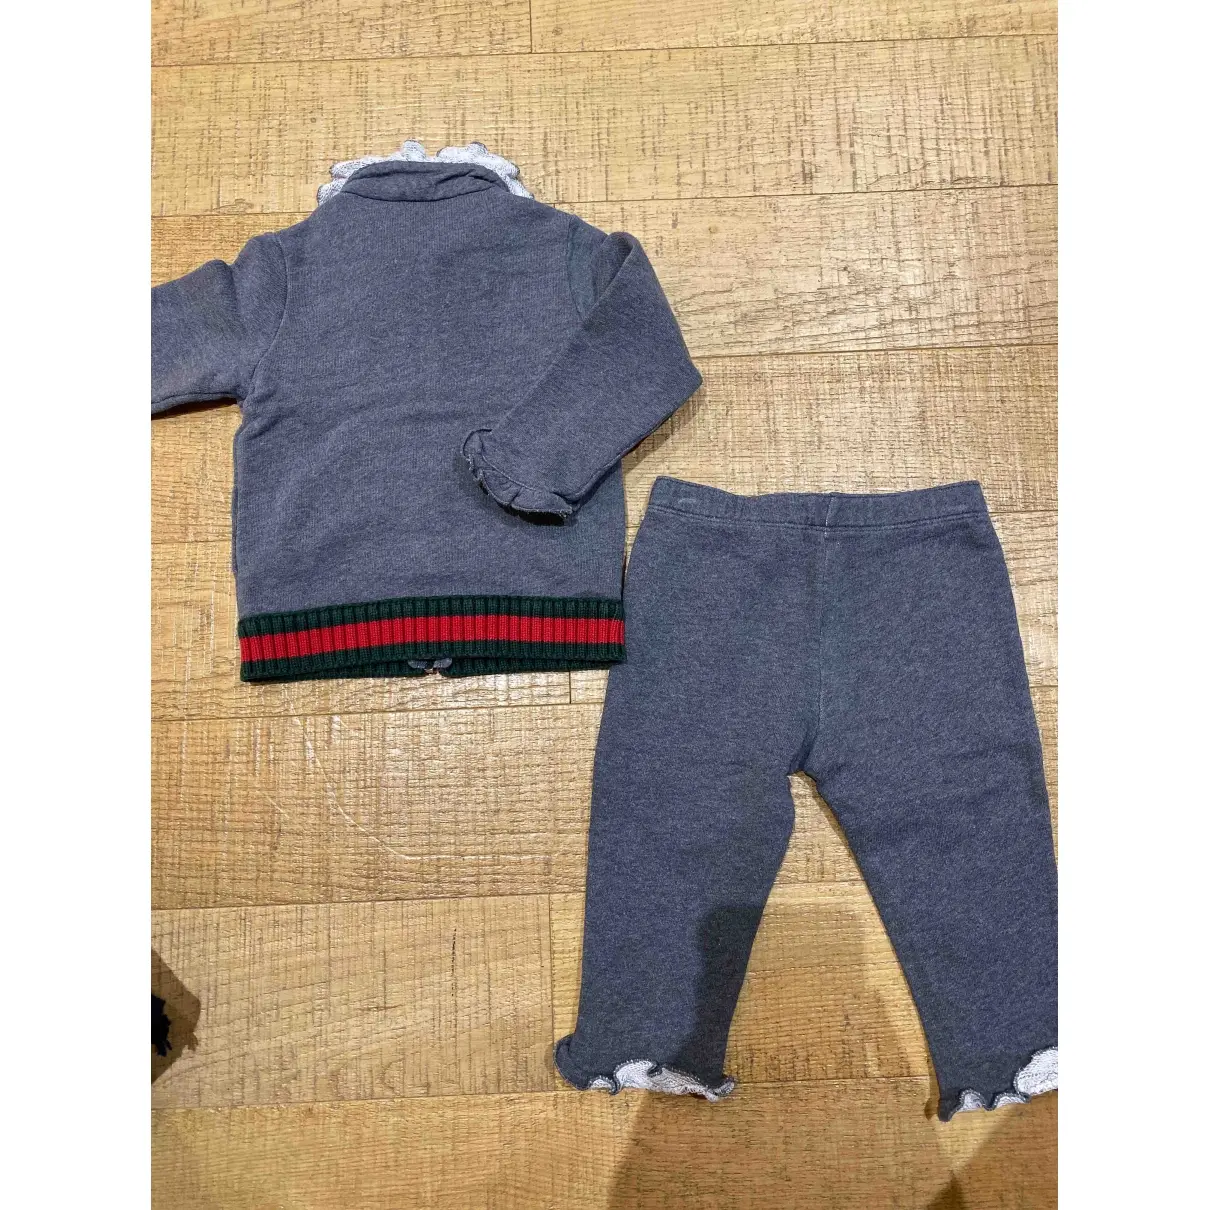 Gucci Outfit for sale